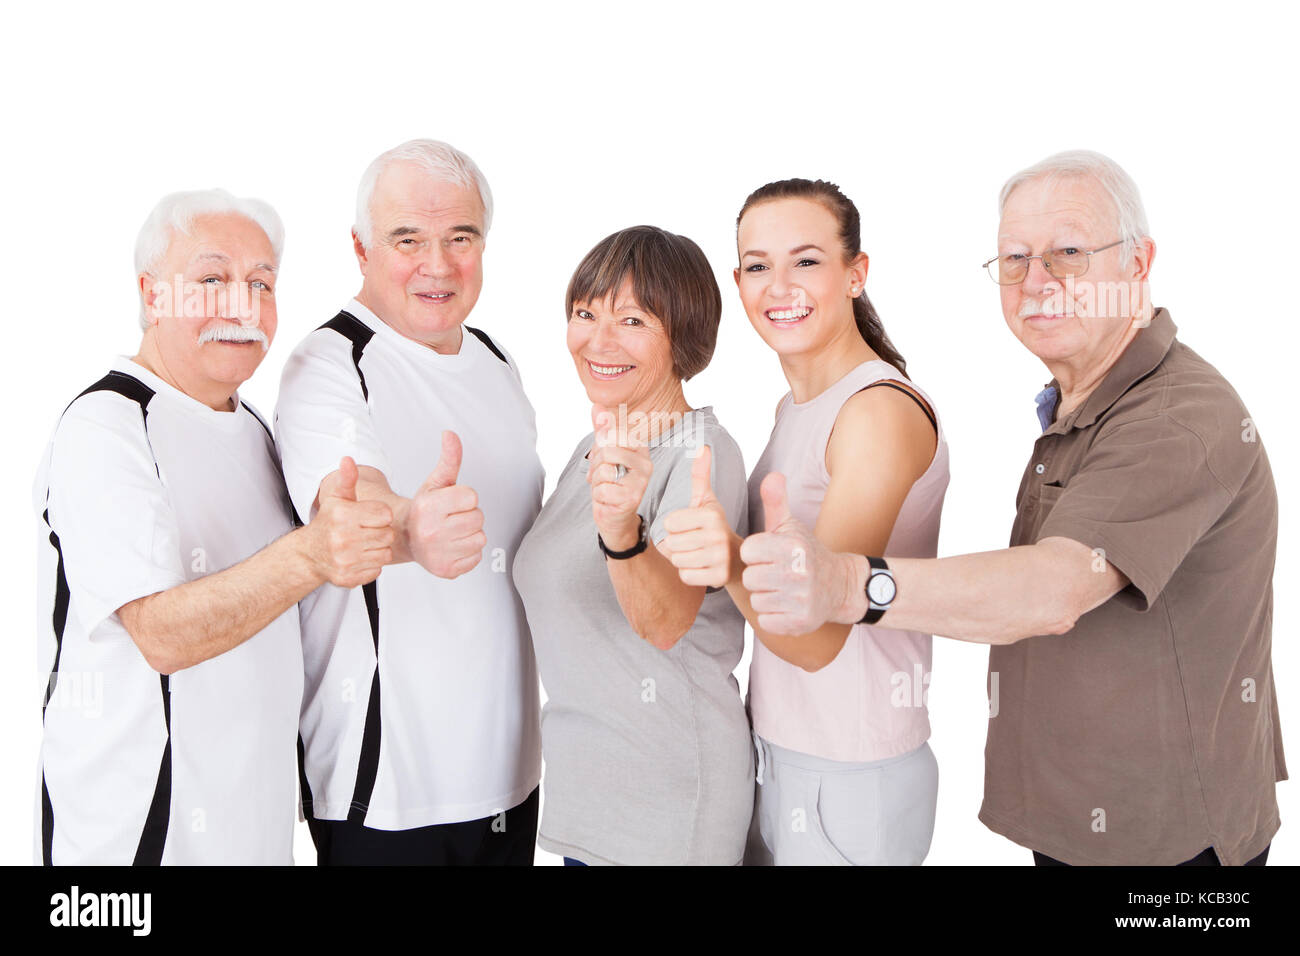 Group Of Senior People Showing Thumbs Up In Front Of White Background Stock Photo